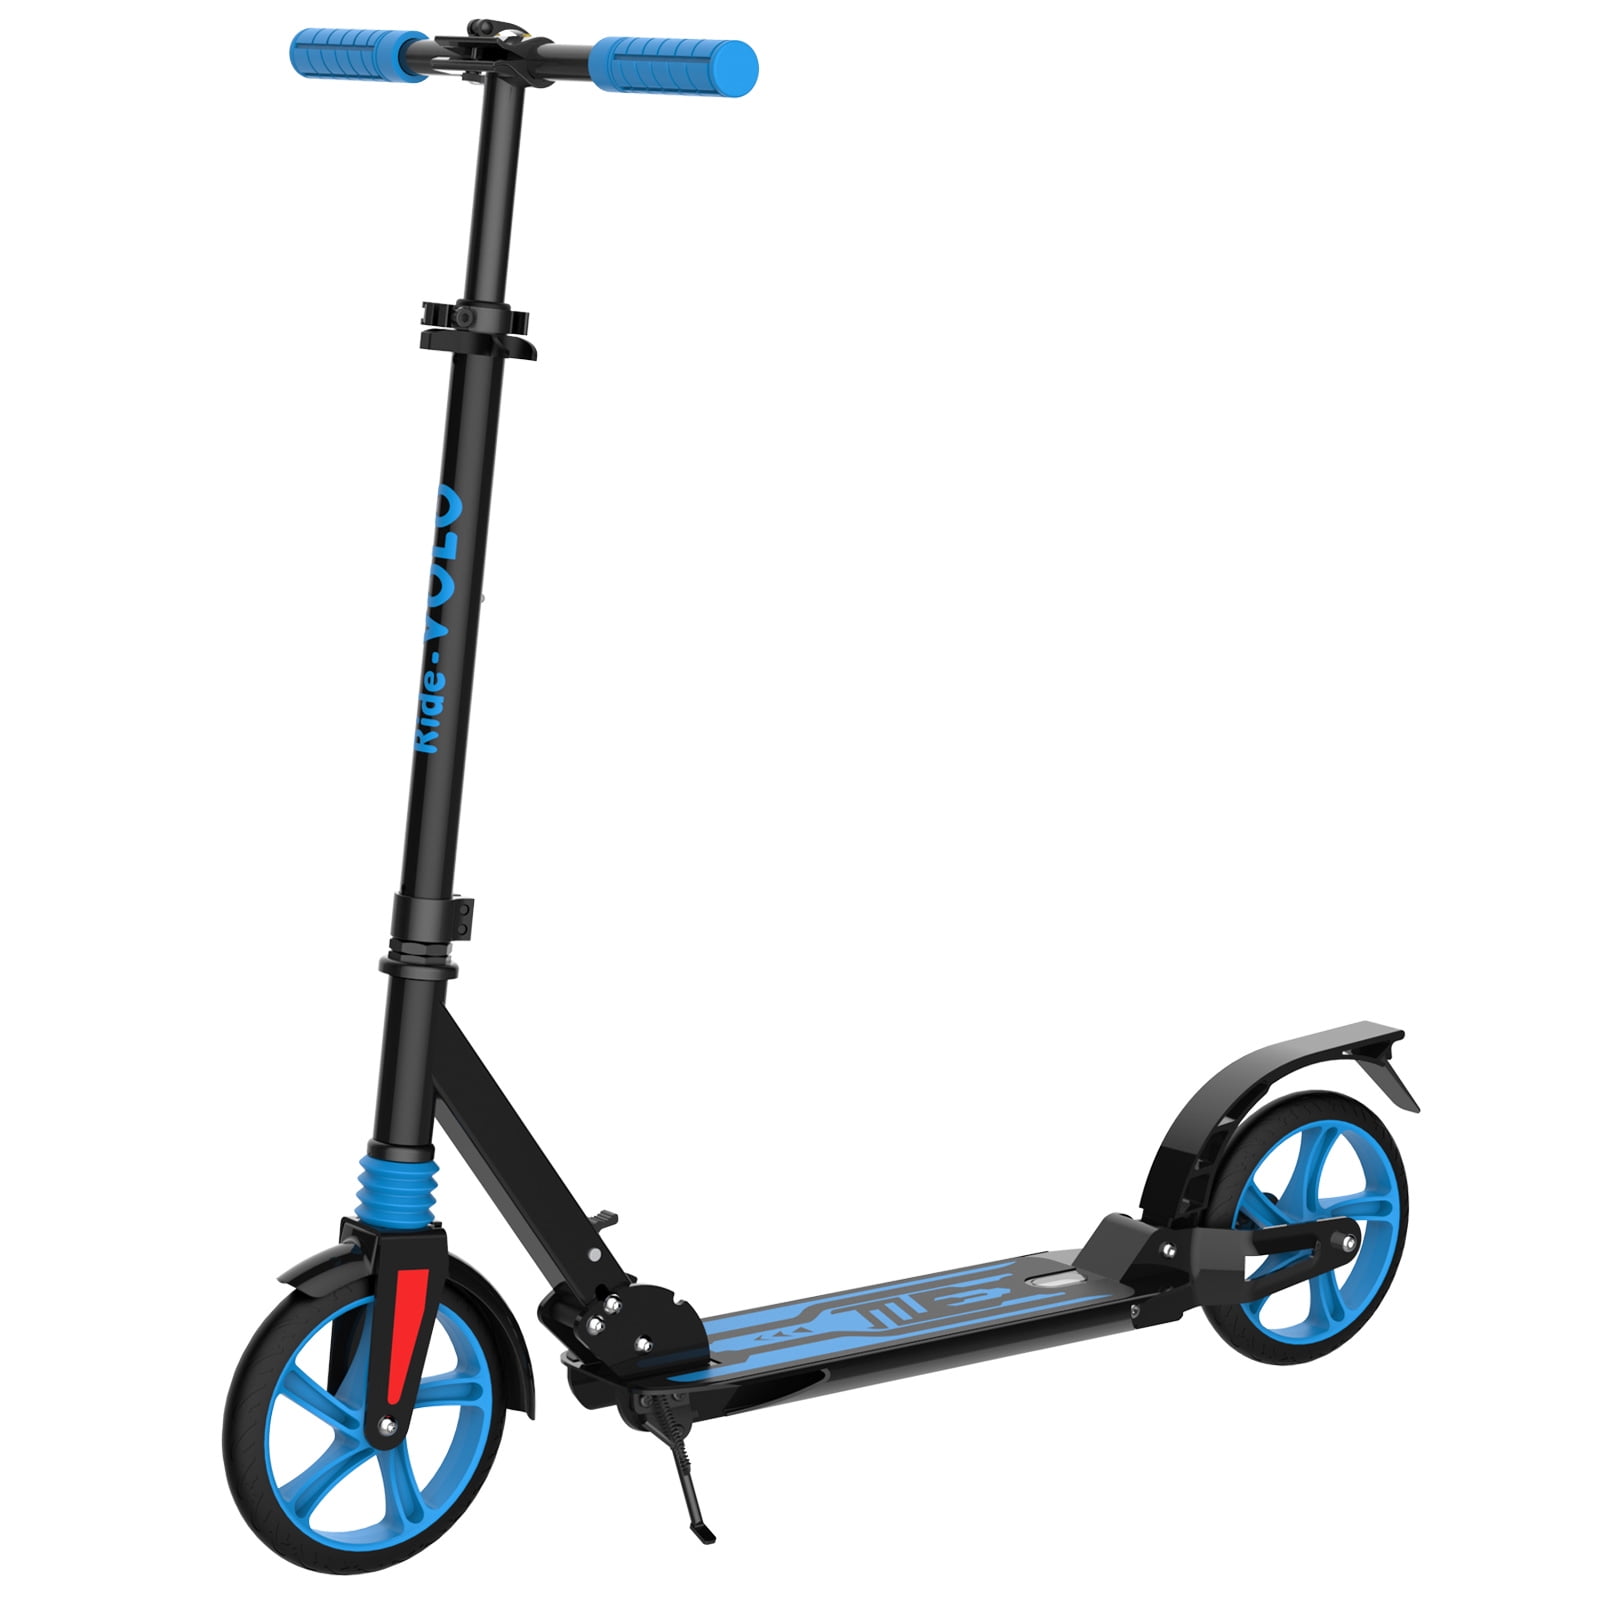 Folding System and Suspension System Years Old with 8inch Wheels and 3 Adjustable Height RideVOLO K08 Kick Scooter for 8